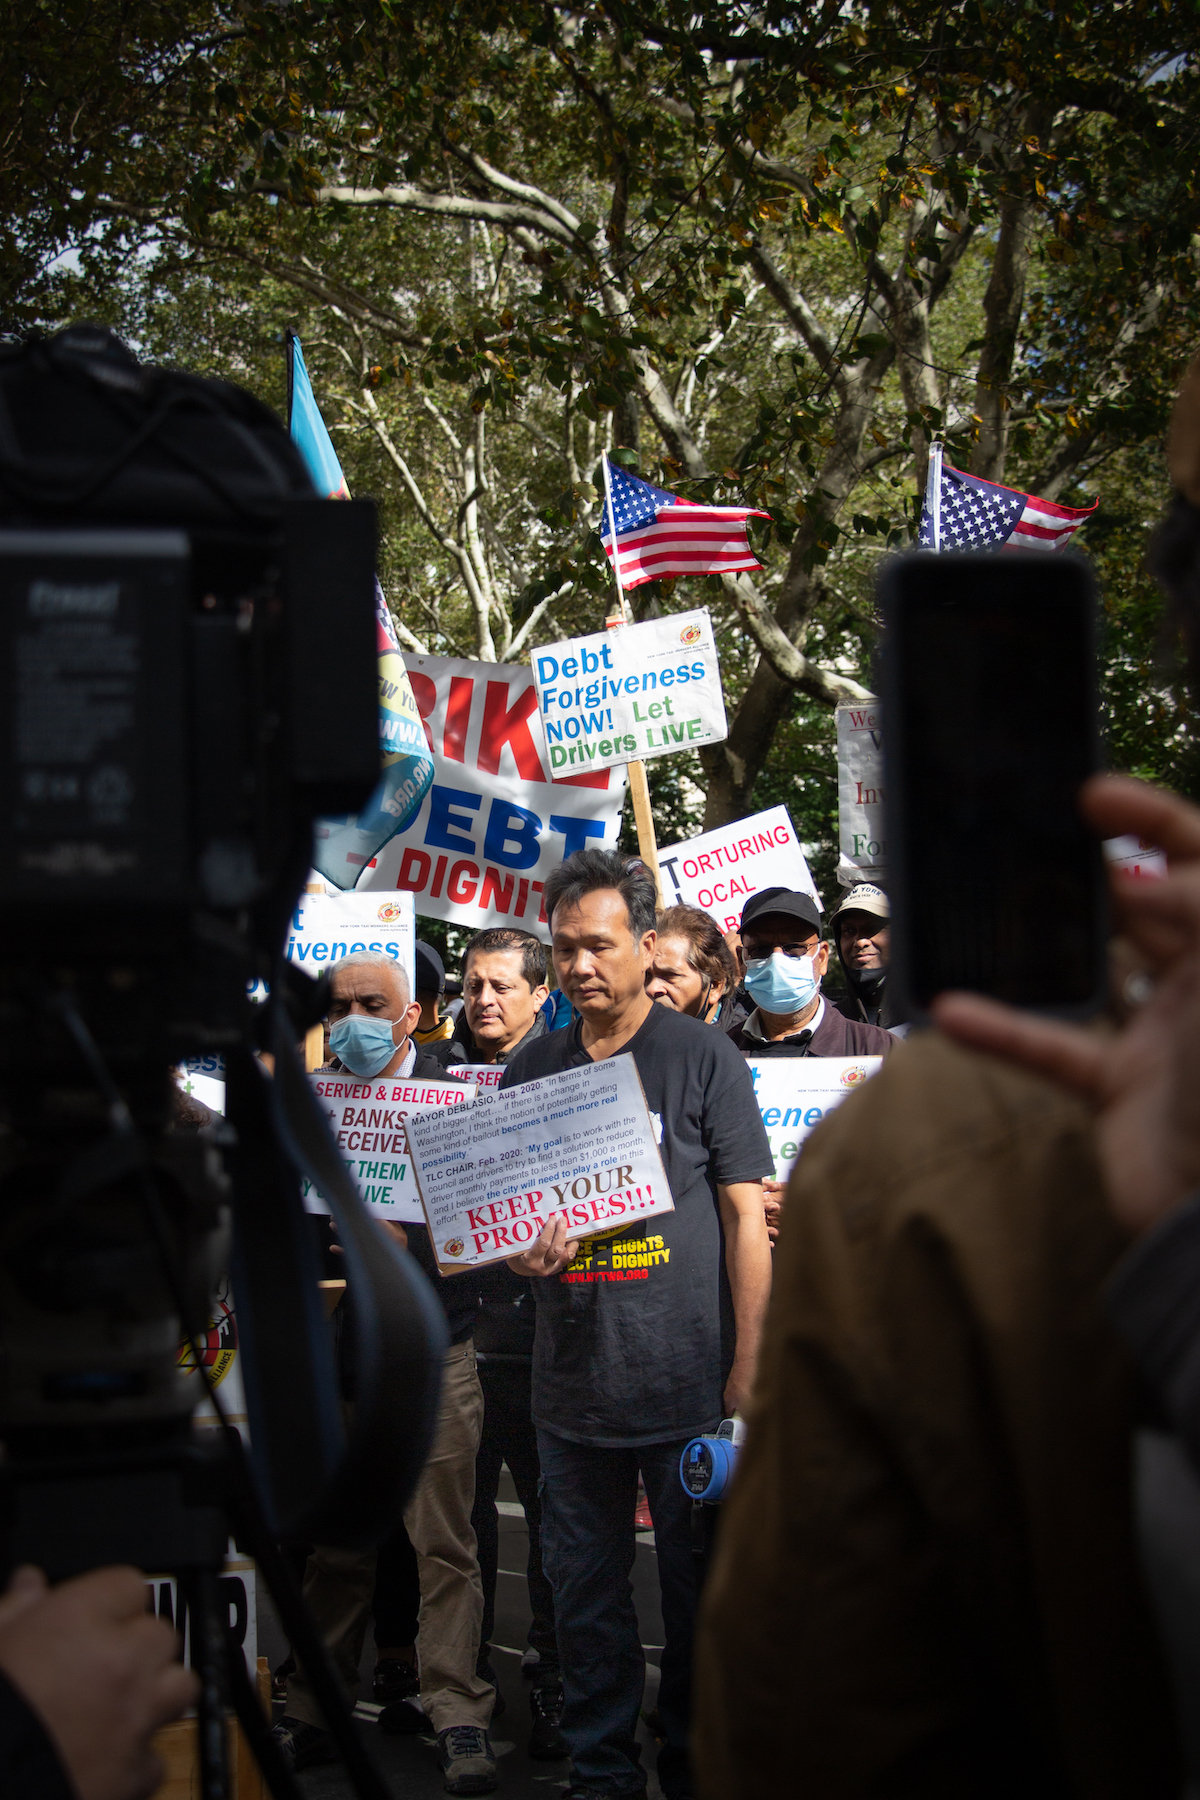 A crowd of protestors holding signs stand in a park. One older man in the center of the group, his eyes closed, is framed by cameras in the foreground.